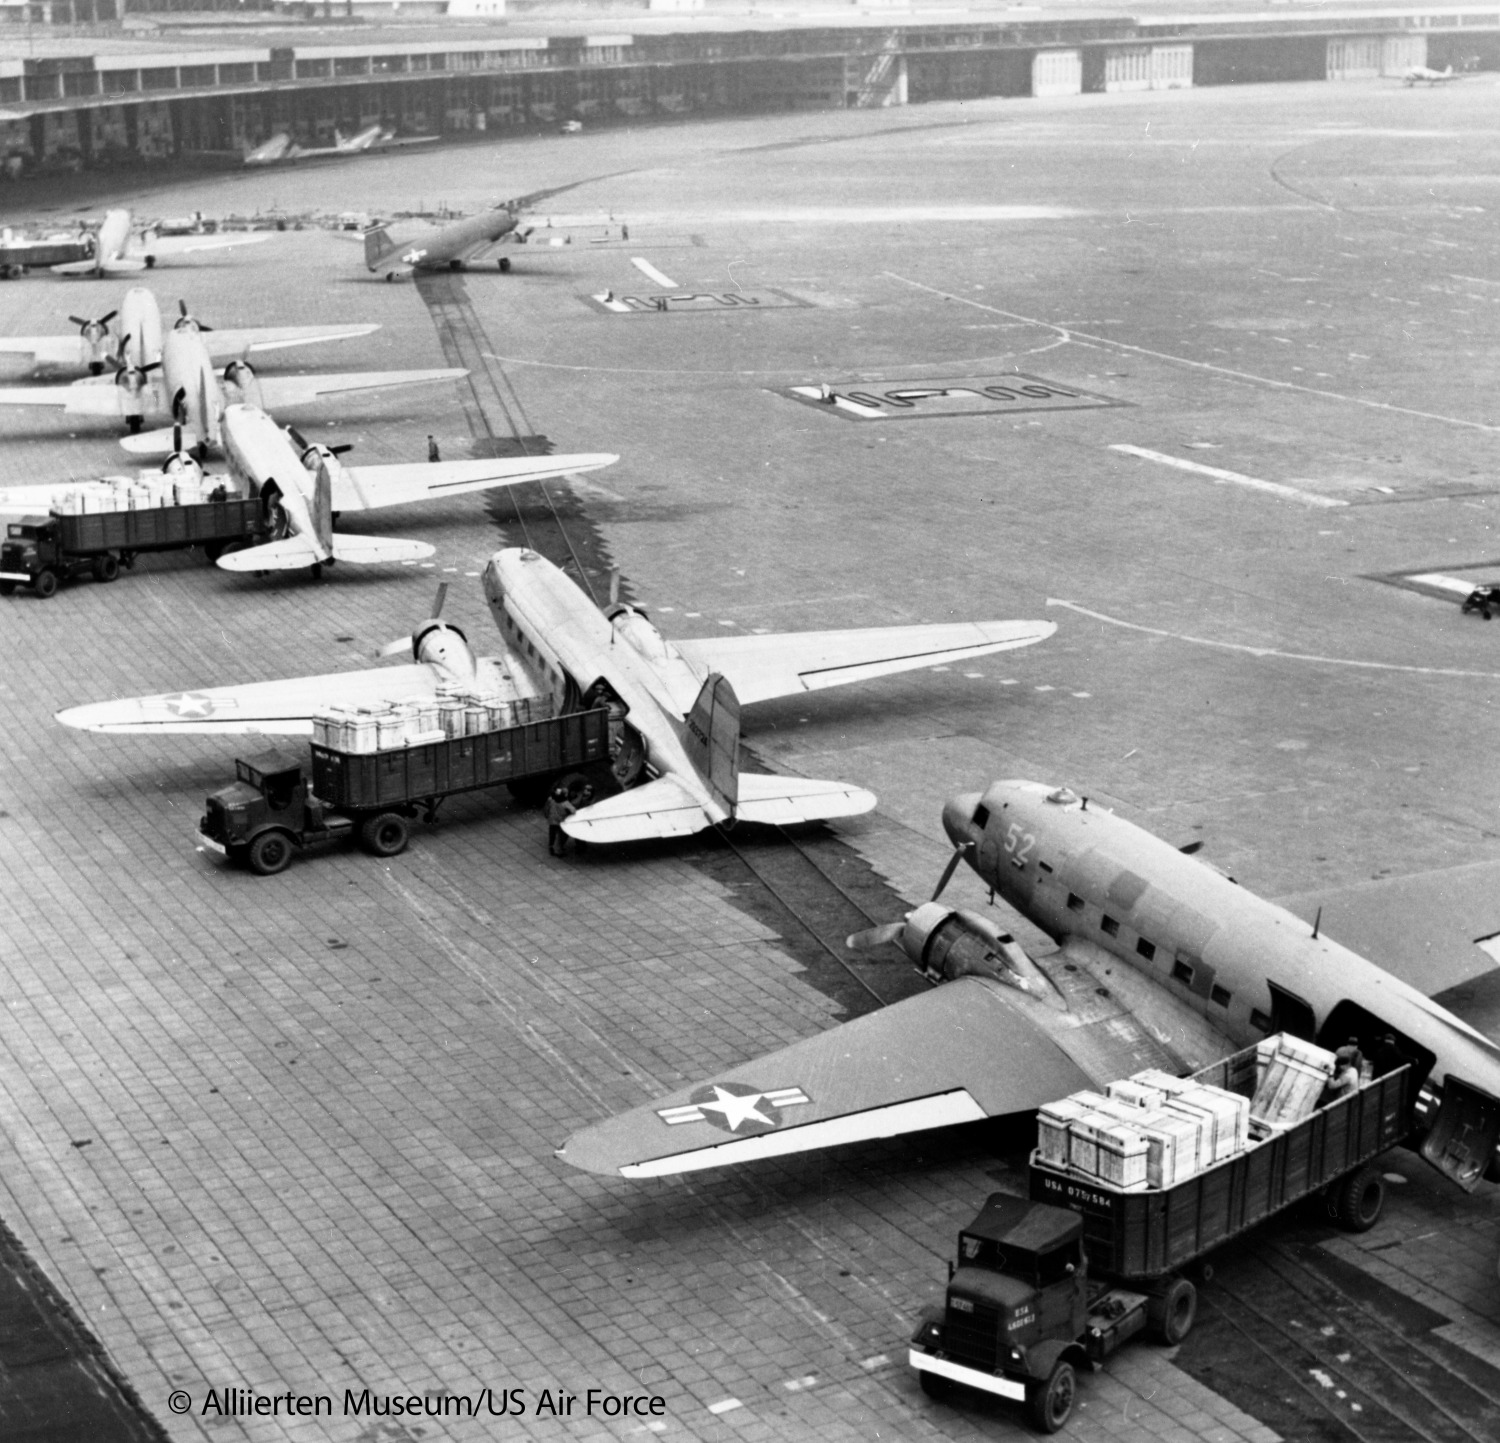 several airplanes on the landing field of an airport